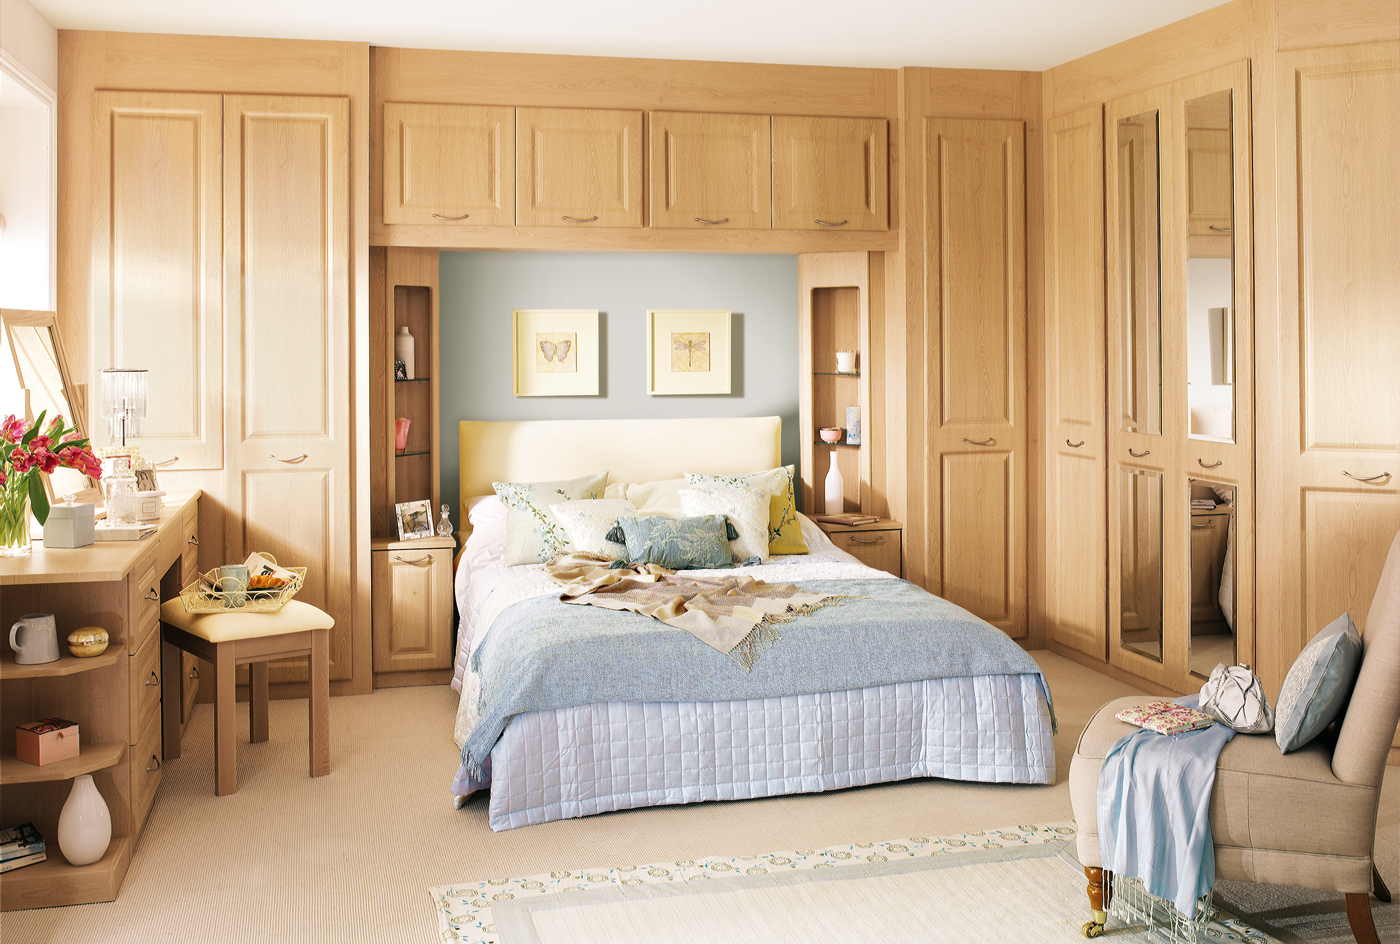 Modern-Wickes-Fitted-Bedroom-Furniture-With-Fitted-Wardrobes-Around-Bed-For-Cozy-Bedroom-Design